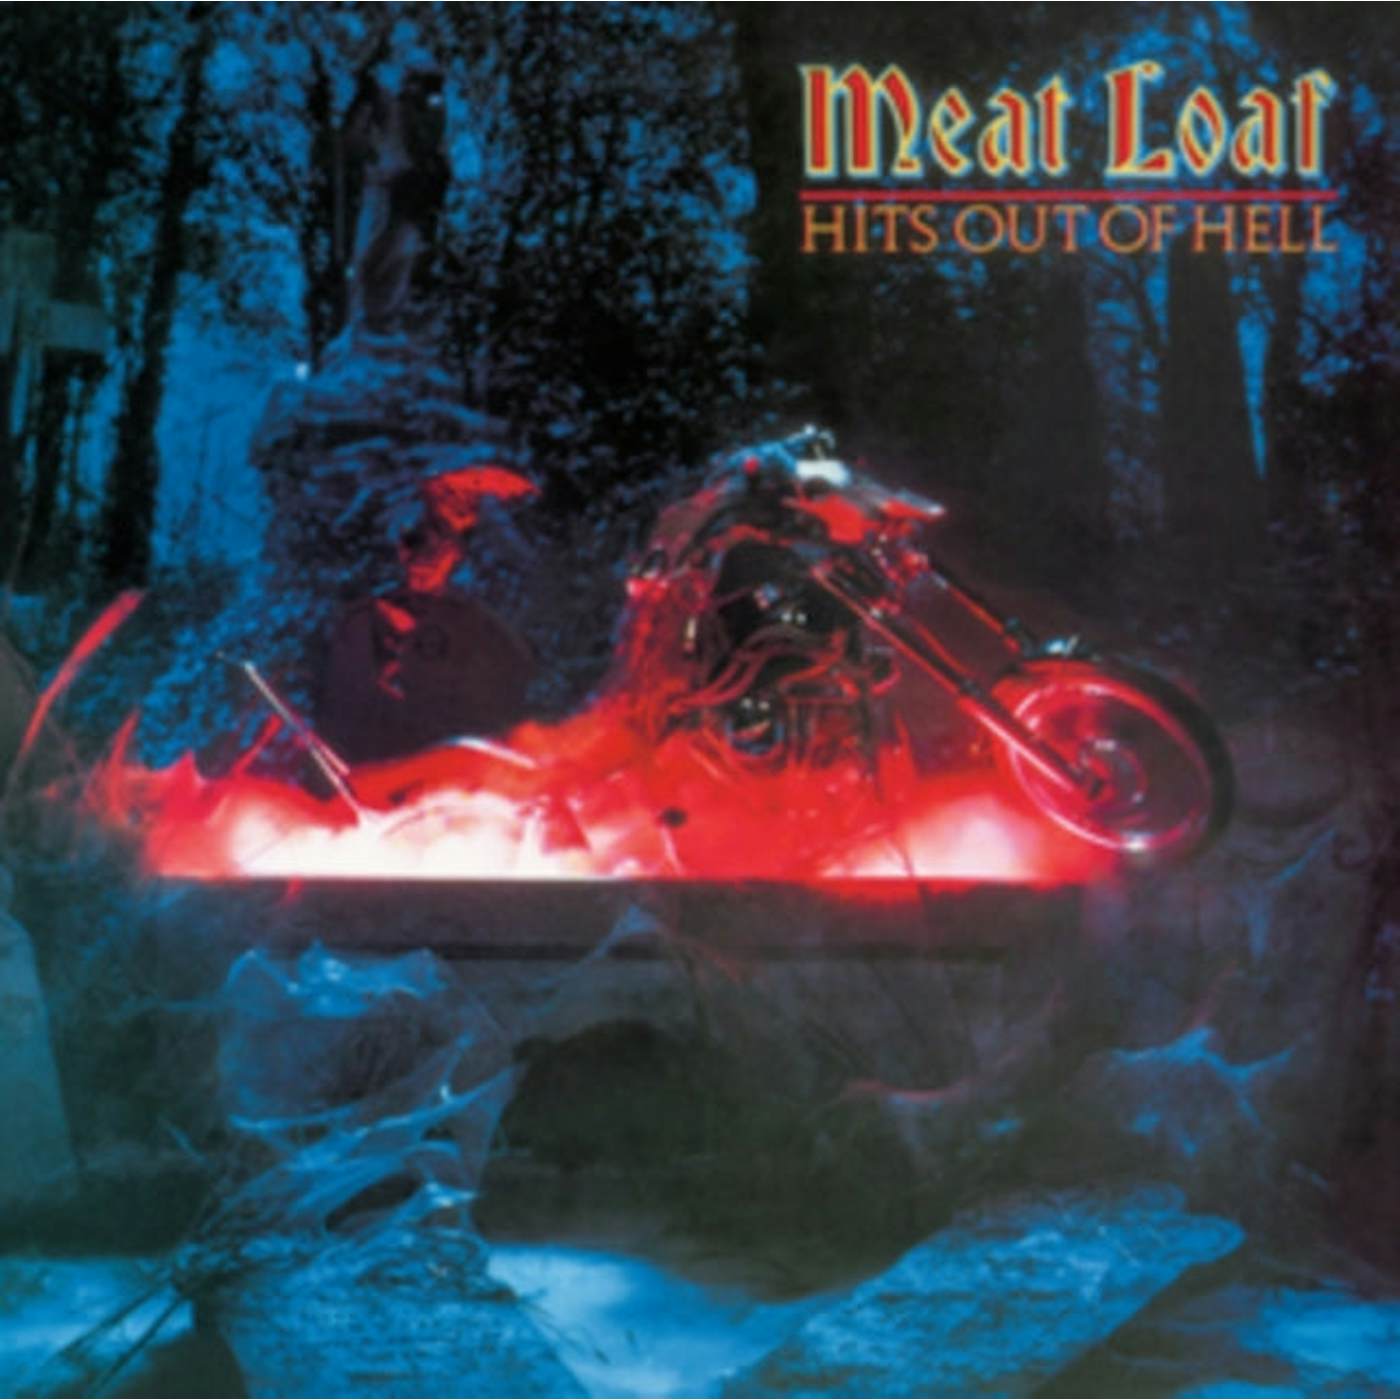 Meat Loaf LP Vinyl Record - Hits Out Of Hell